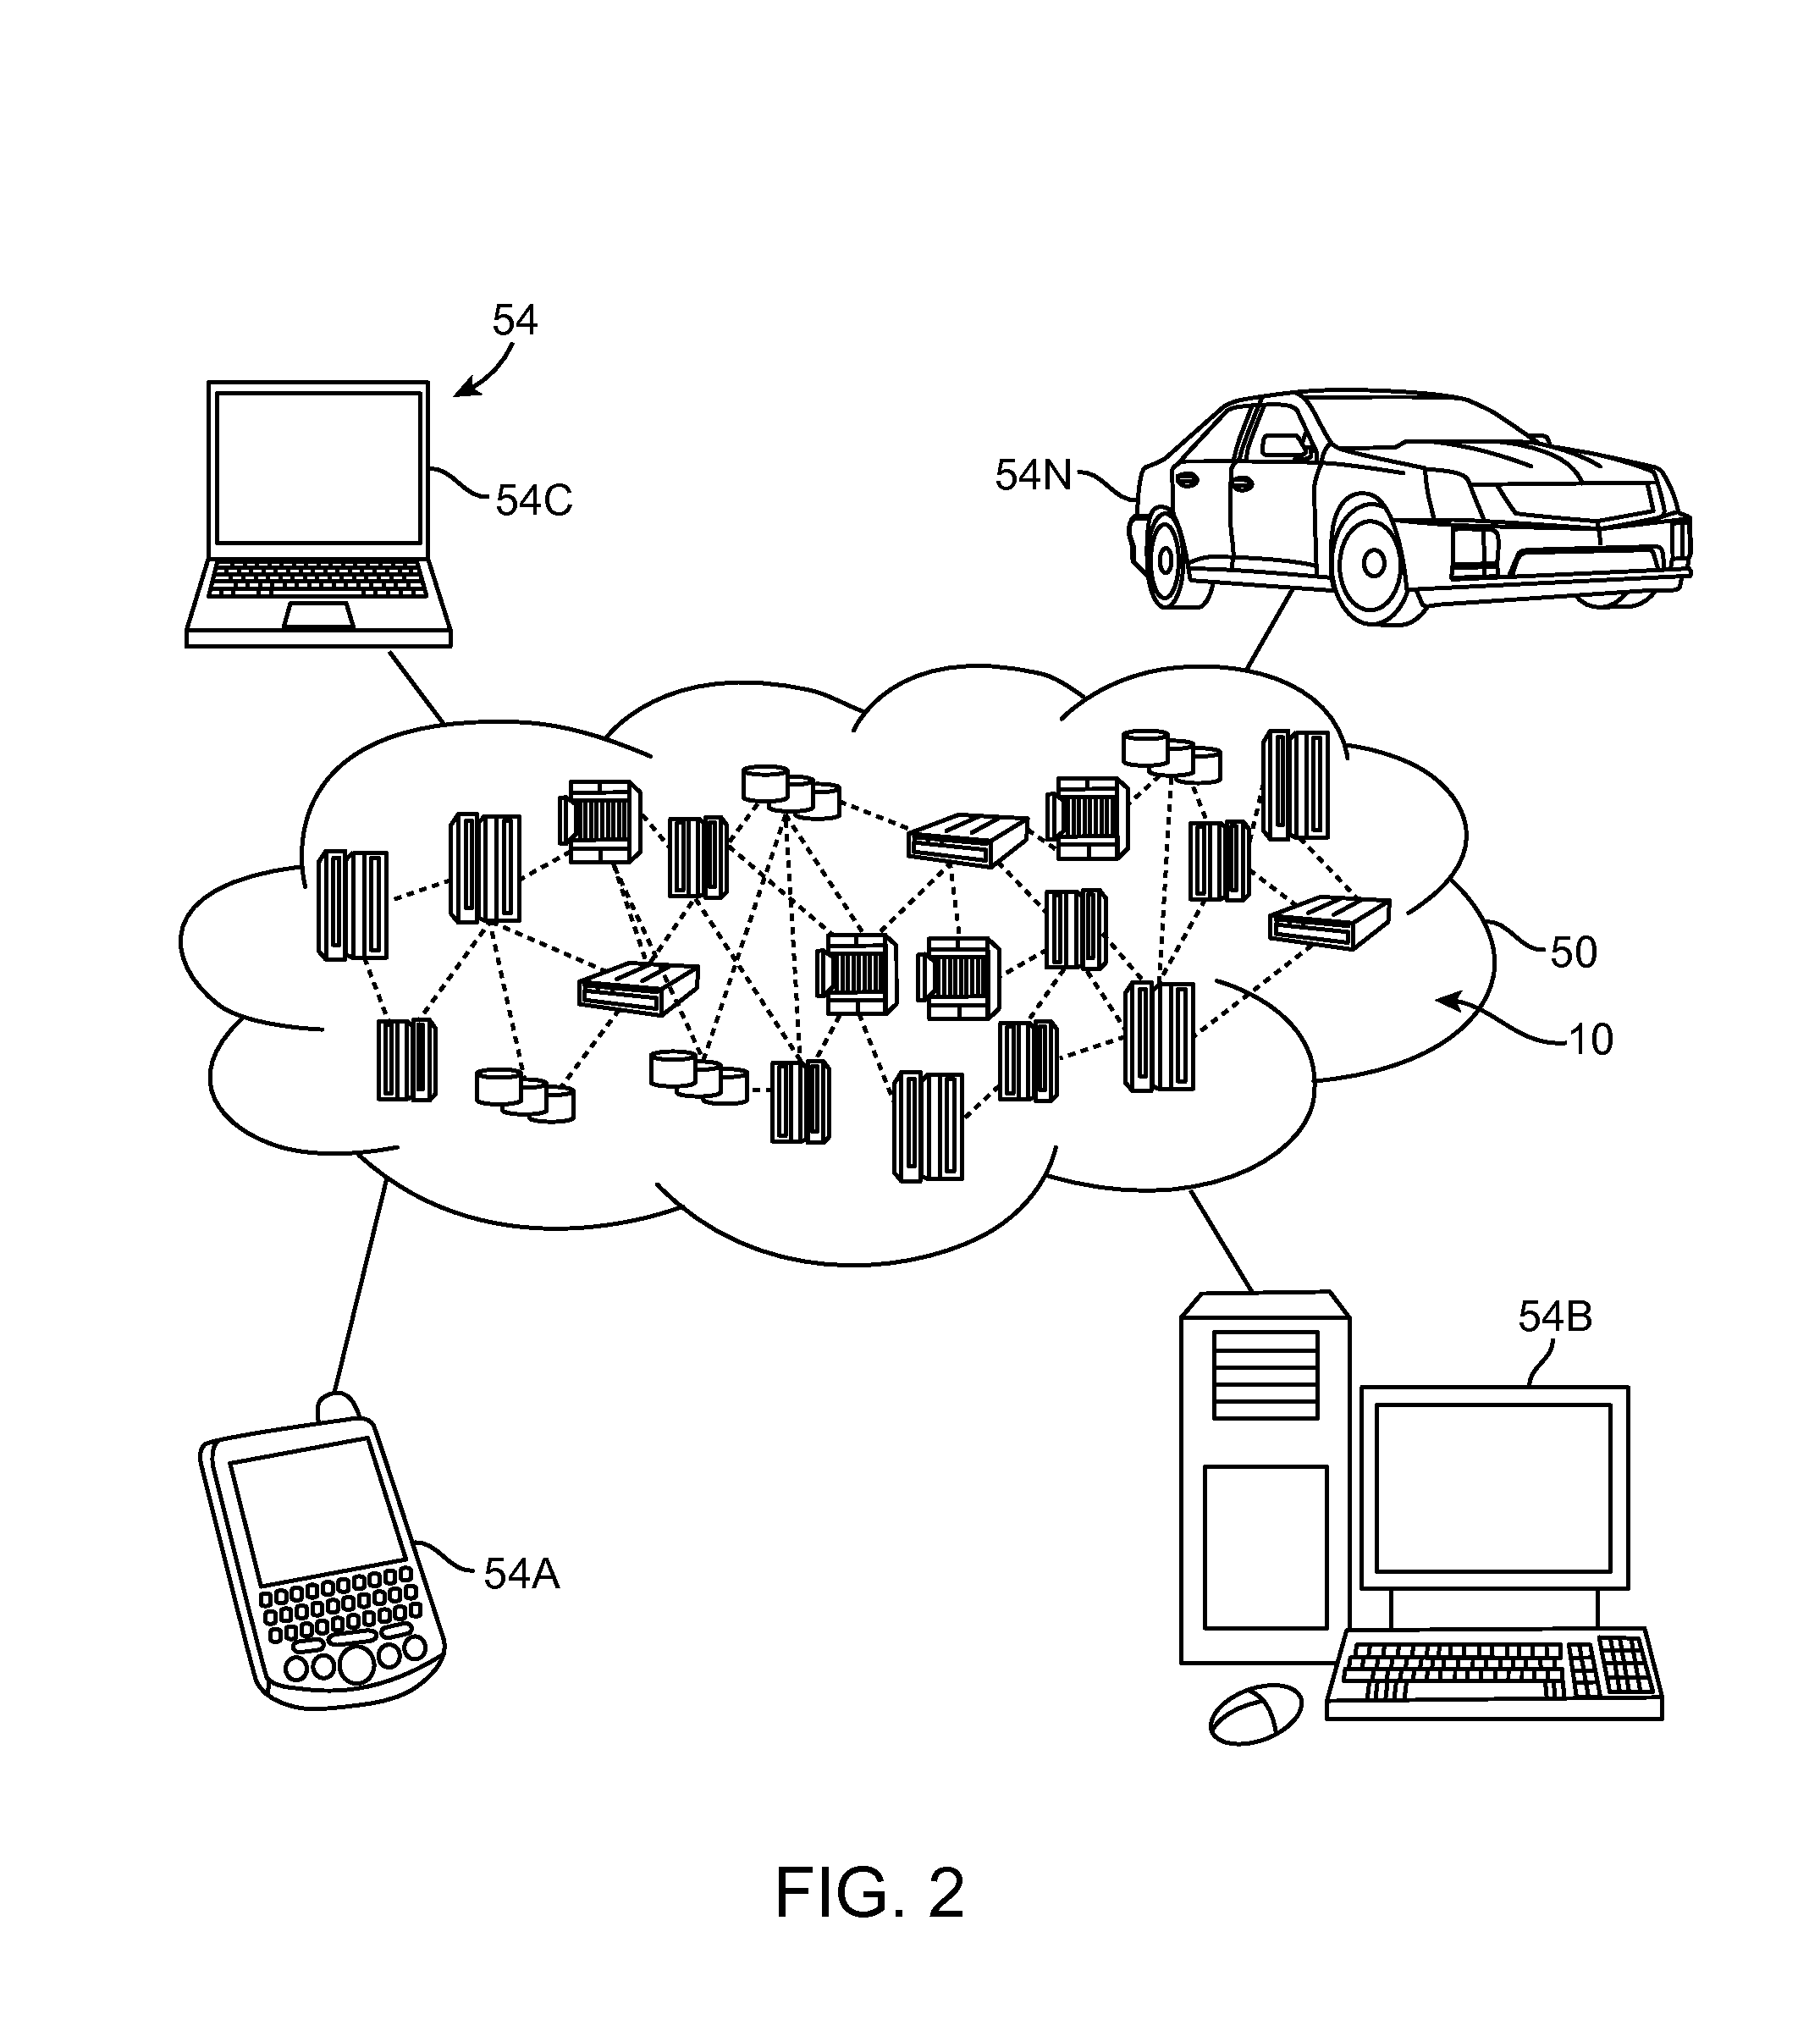 Quantized congestion notification in a virtual networking system